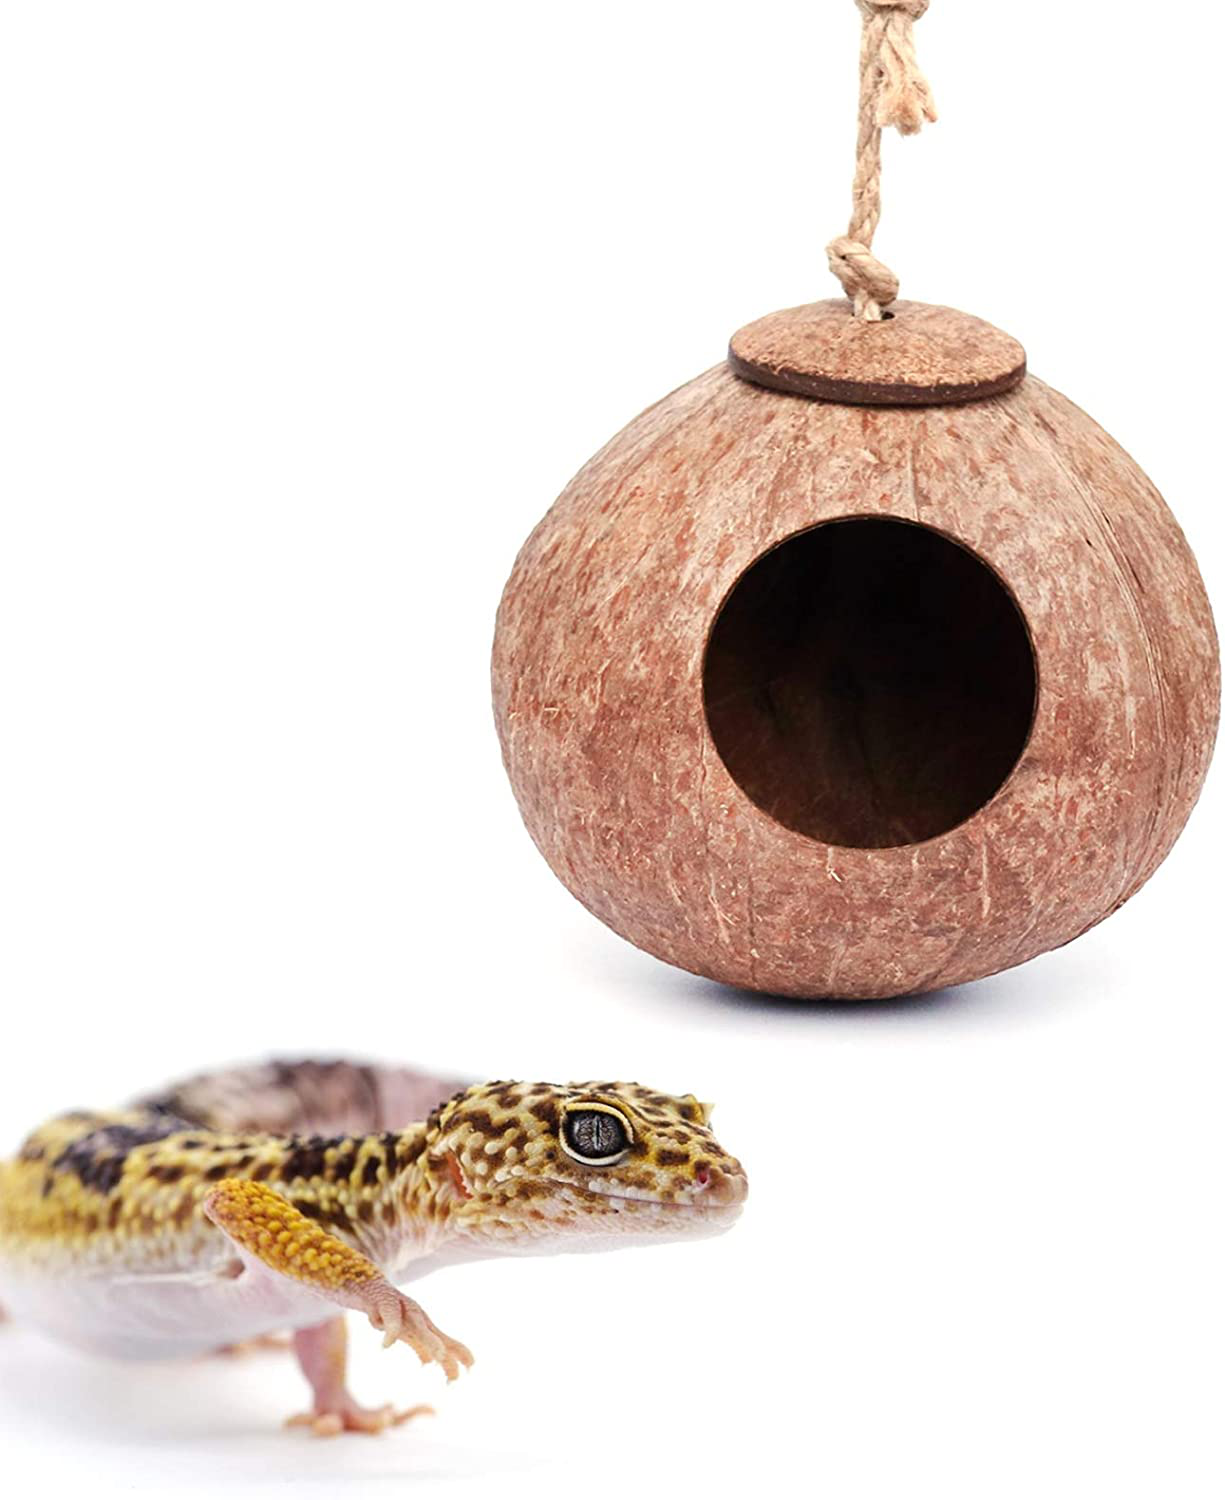 Gecko Coconut Husk Hut, Bird Hut Nesting House Hideouts Hanging Home, Treat & Food Dispenser, Durable Cave Habitat with Hanging Loop for Crested Gecko, Reptiles, Amphibians and Small Animals Animals & Pet Supplies > Pet Supplies > Reptile & Amphibian Supplies > Reptile & Amphibian Habitat Accessories Besimple Coconut Husk Hut  